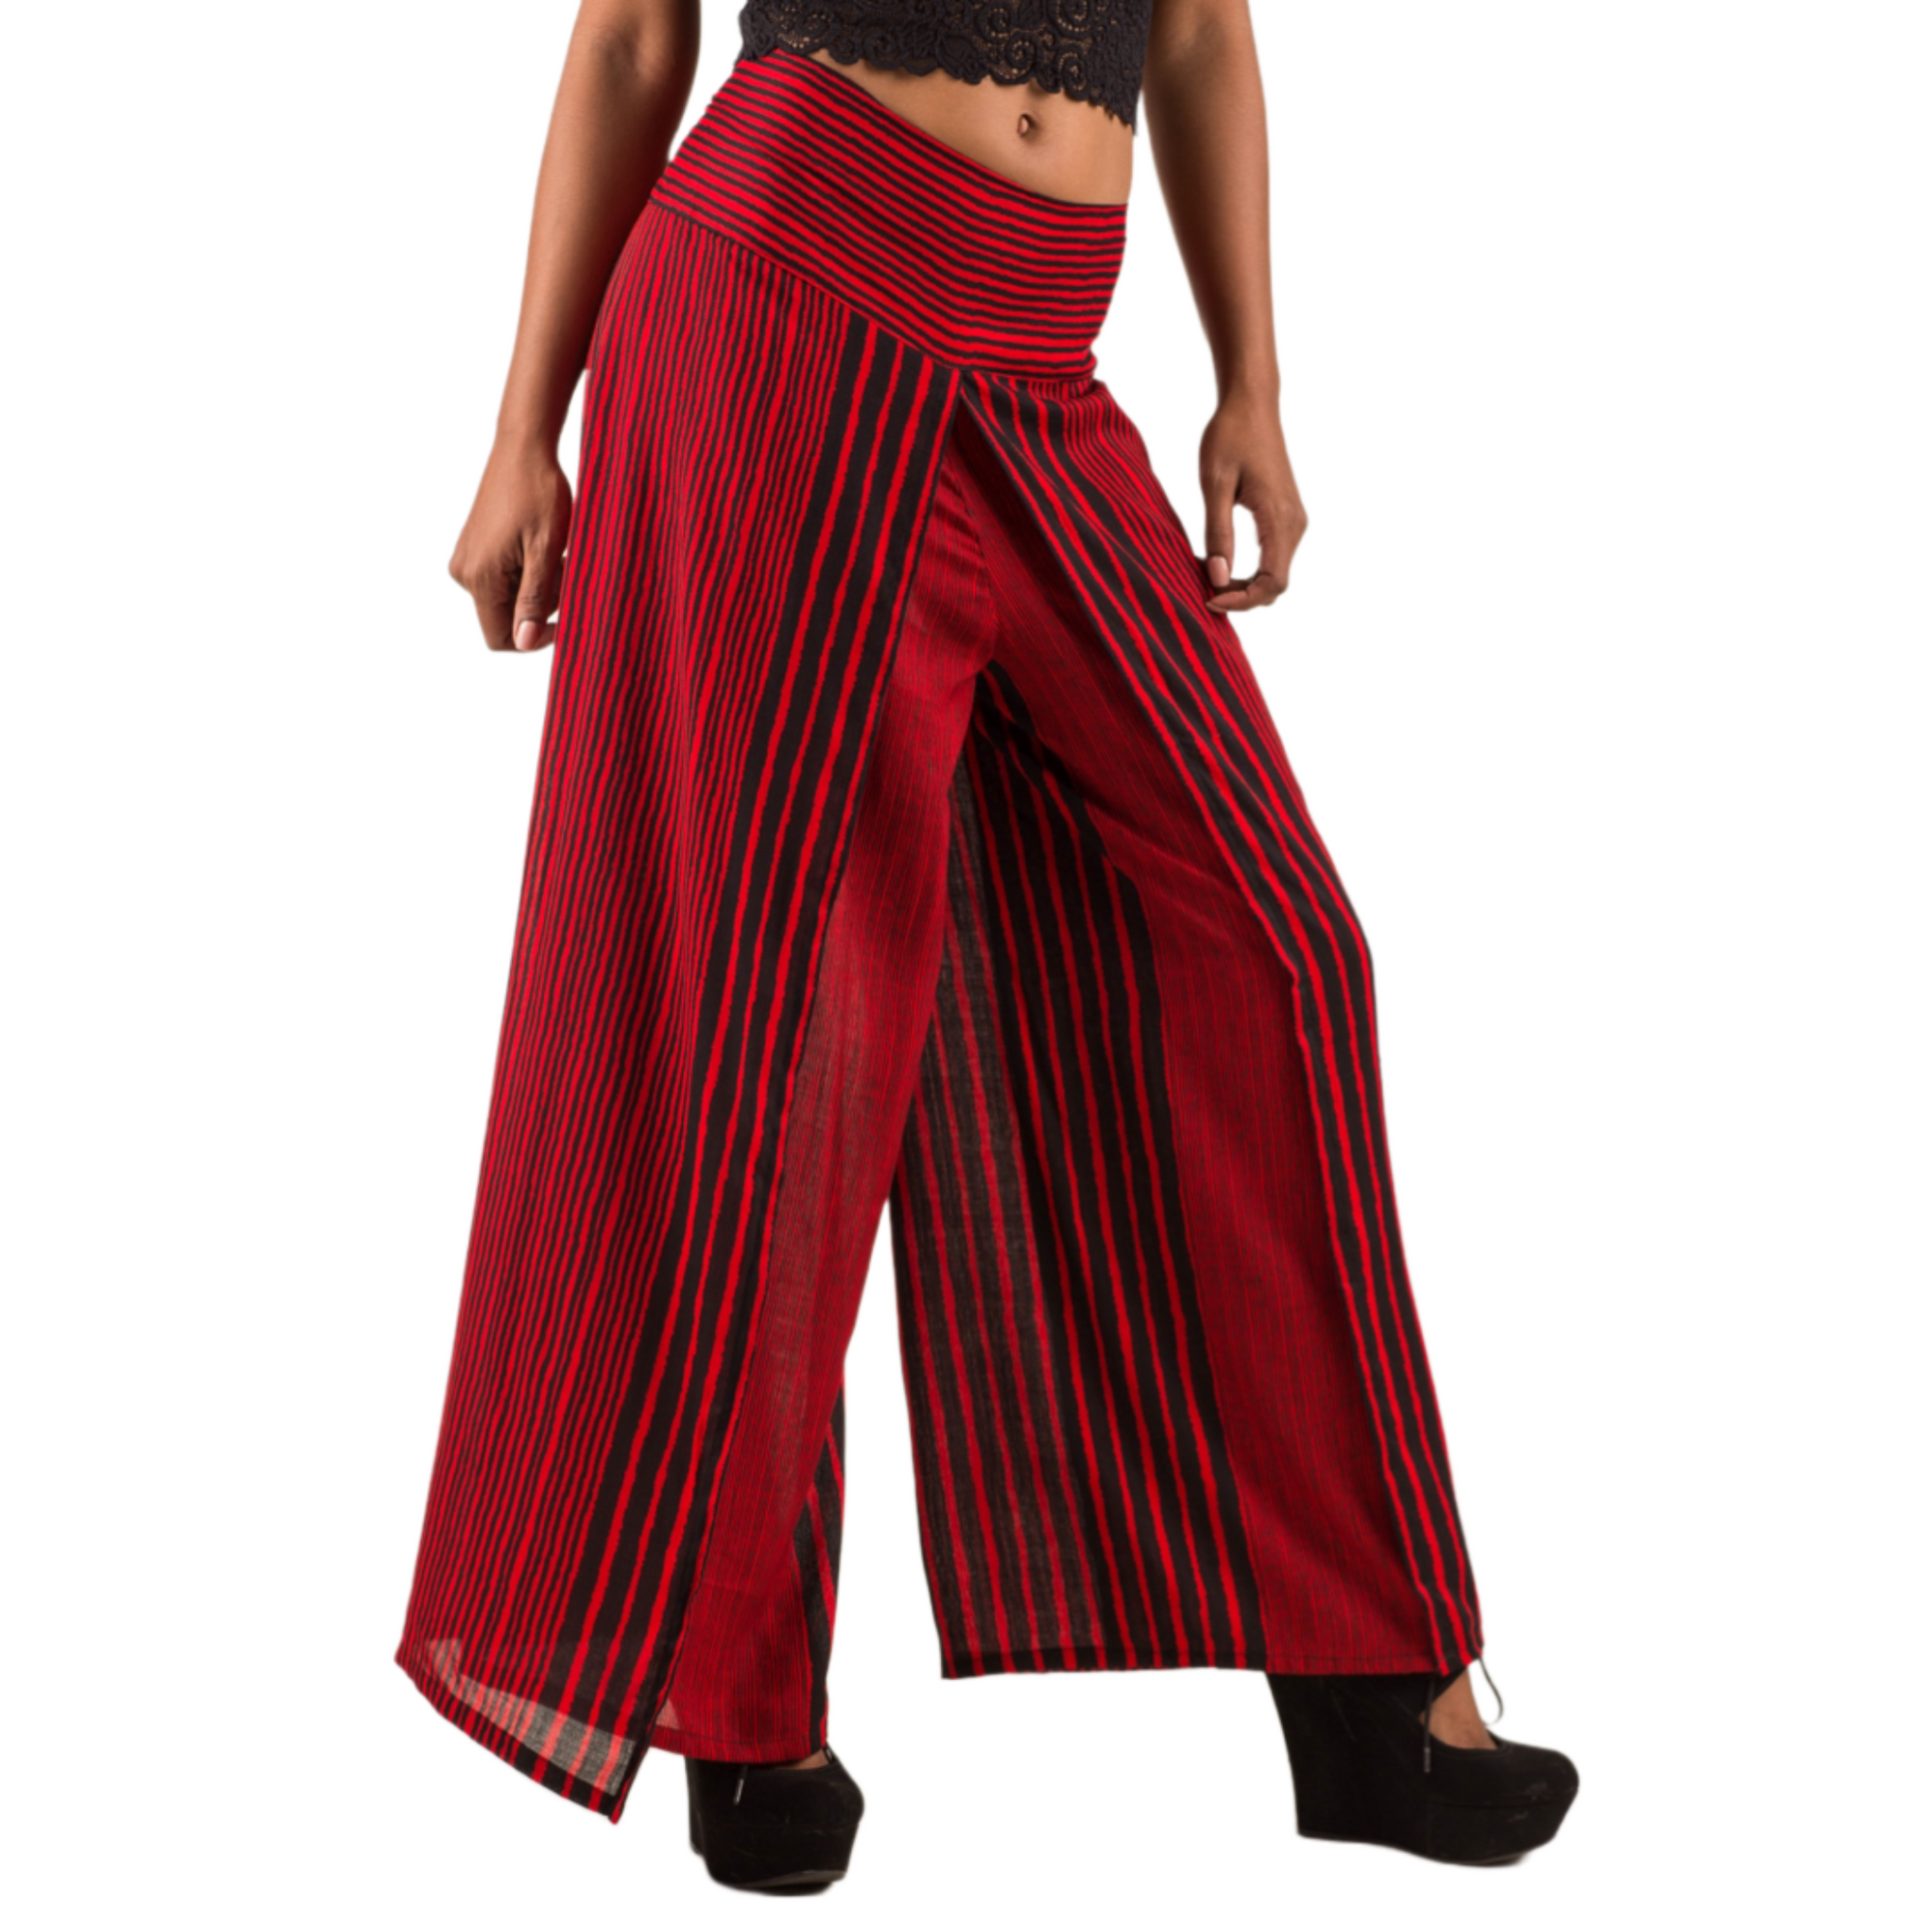 search for summer casual styles at malisun! Clean fashion: handmade, fairtrade, best price for wide leg pants for women | large selection and a variety of colors! | high waisted one size fits most XS to XL 